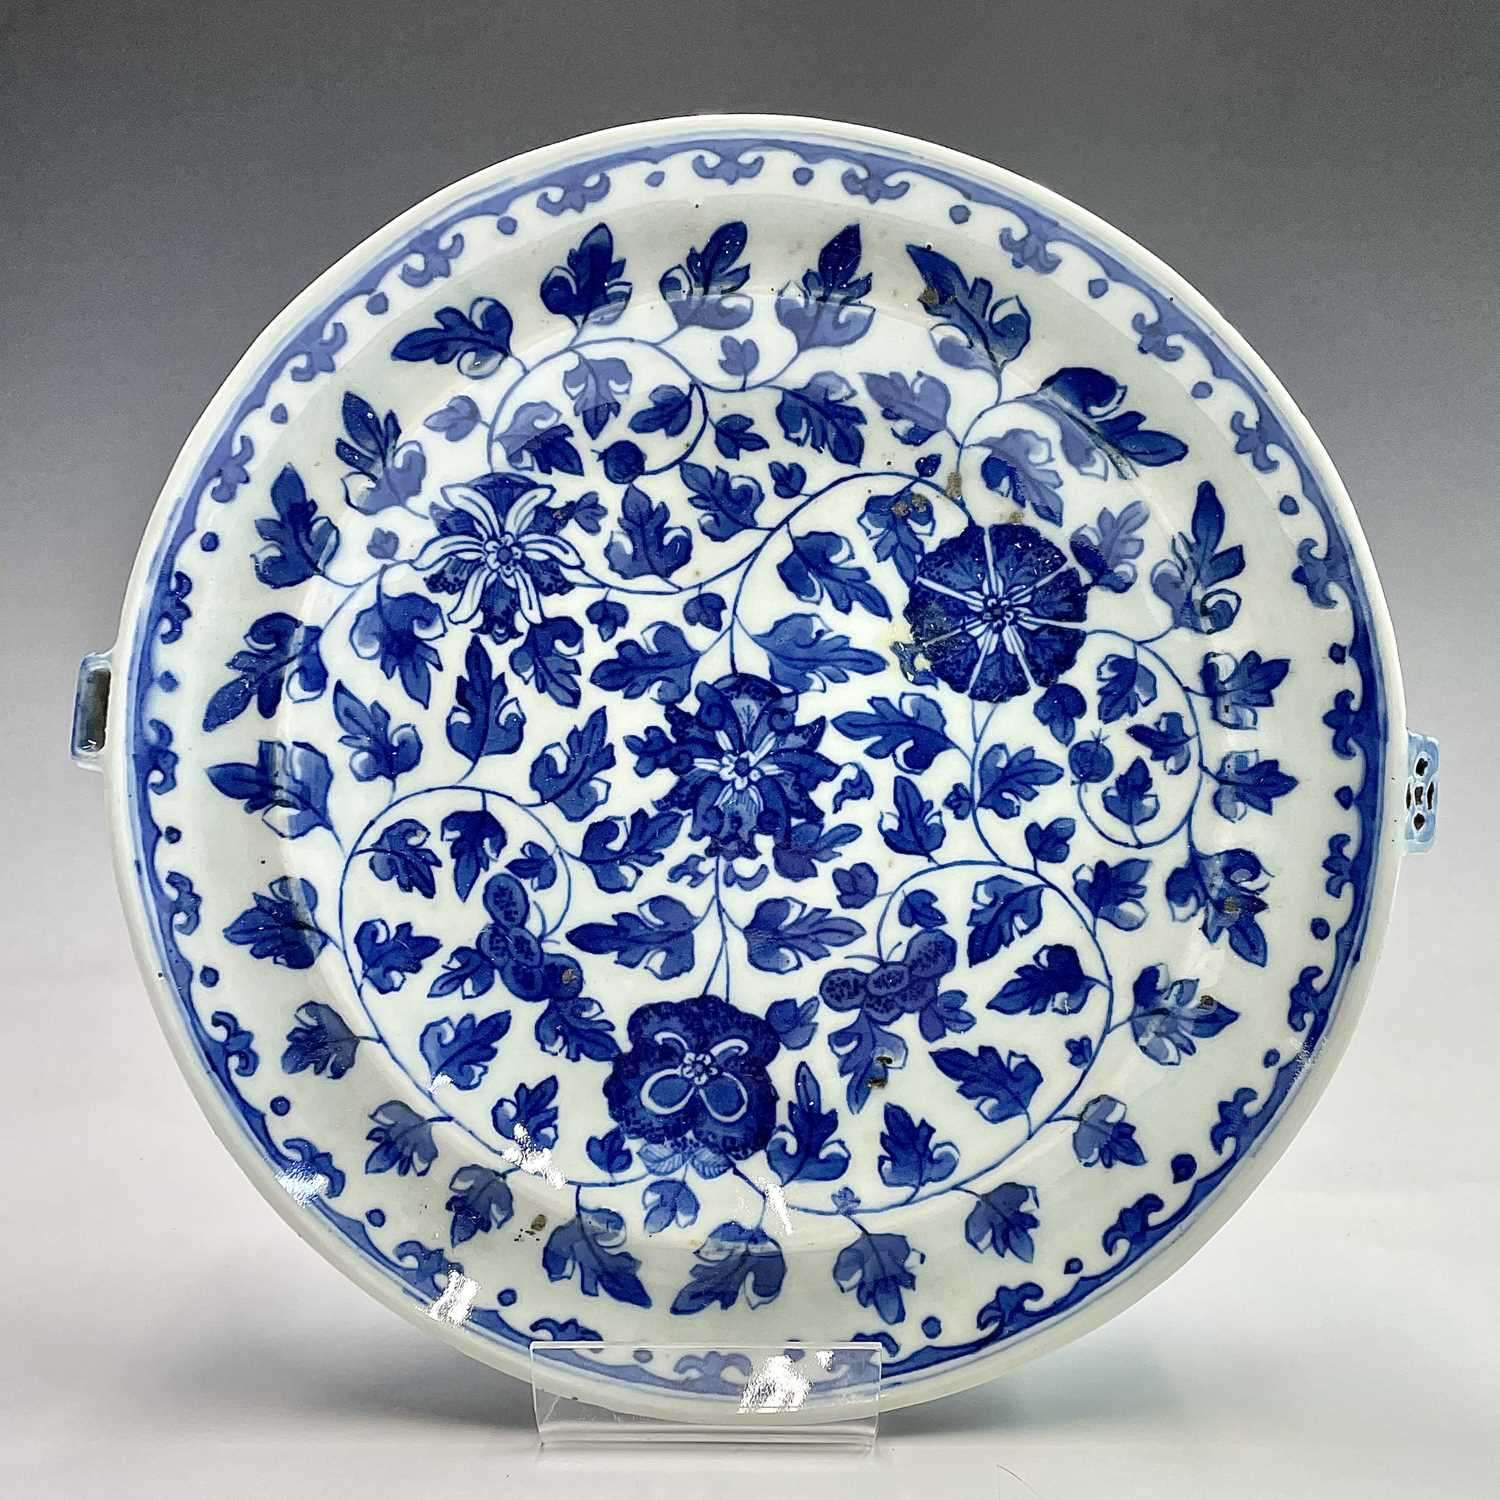 A Chinese export porcelain blue and white warming plate, late 18th century, with an all over